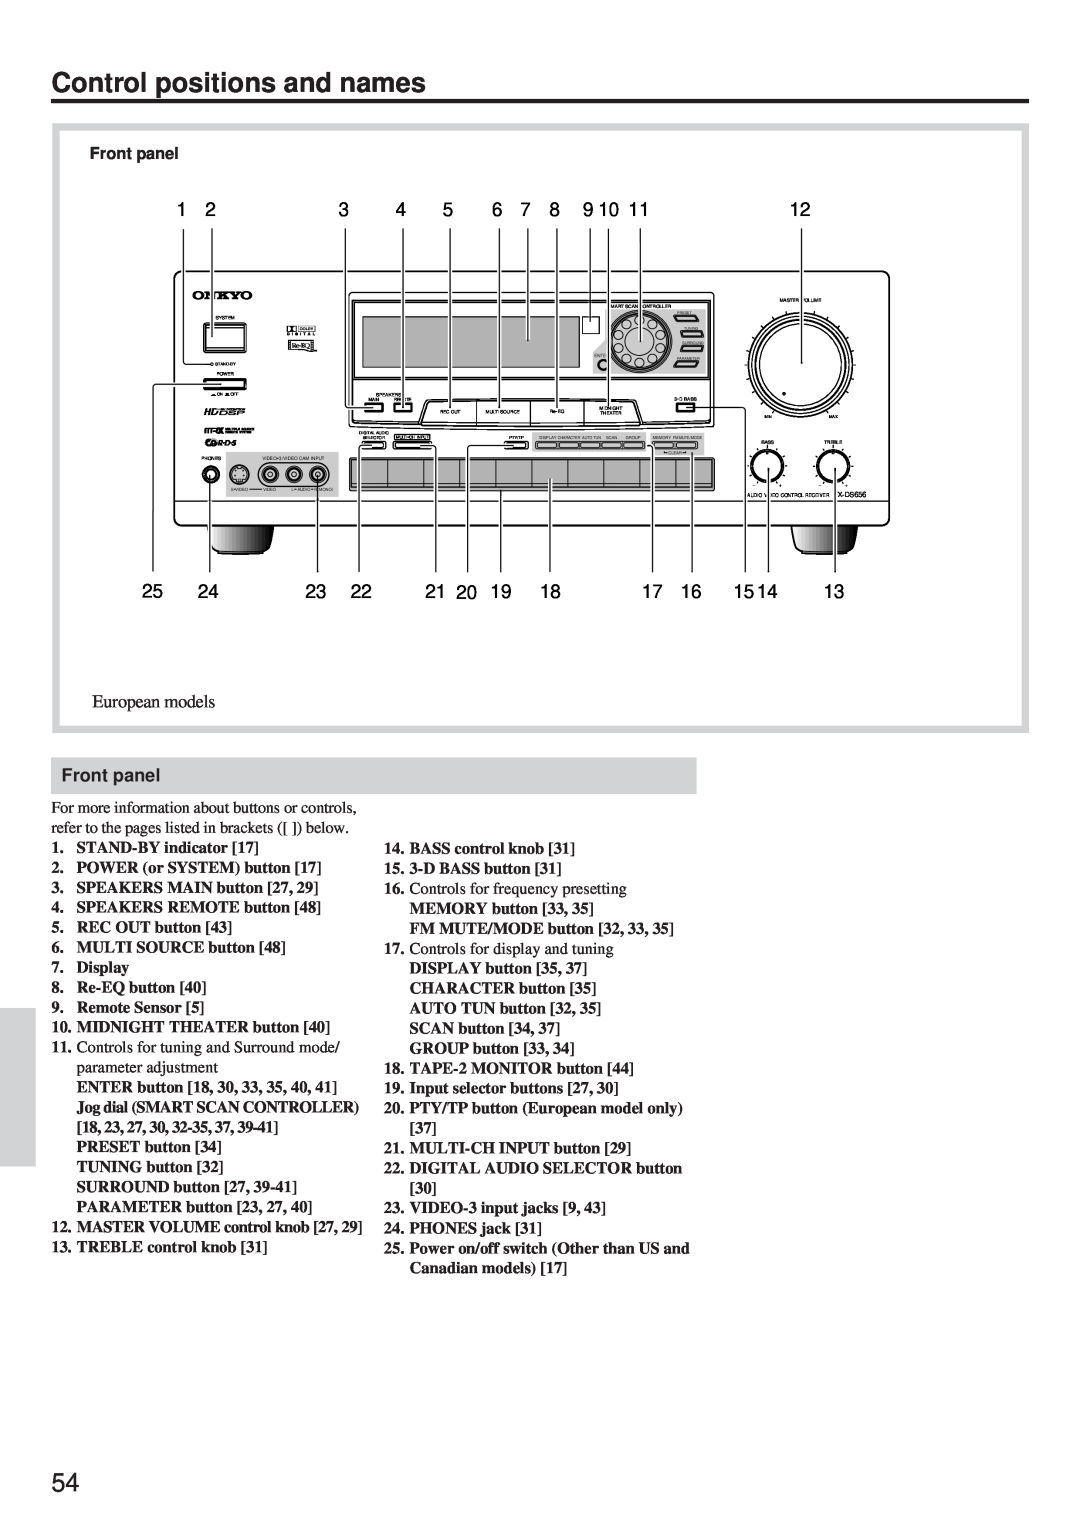 Onkyo TX-DS656 instruction manual Control positions and names, Front panel 